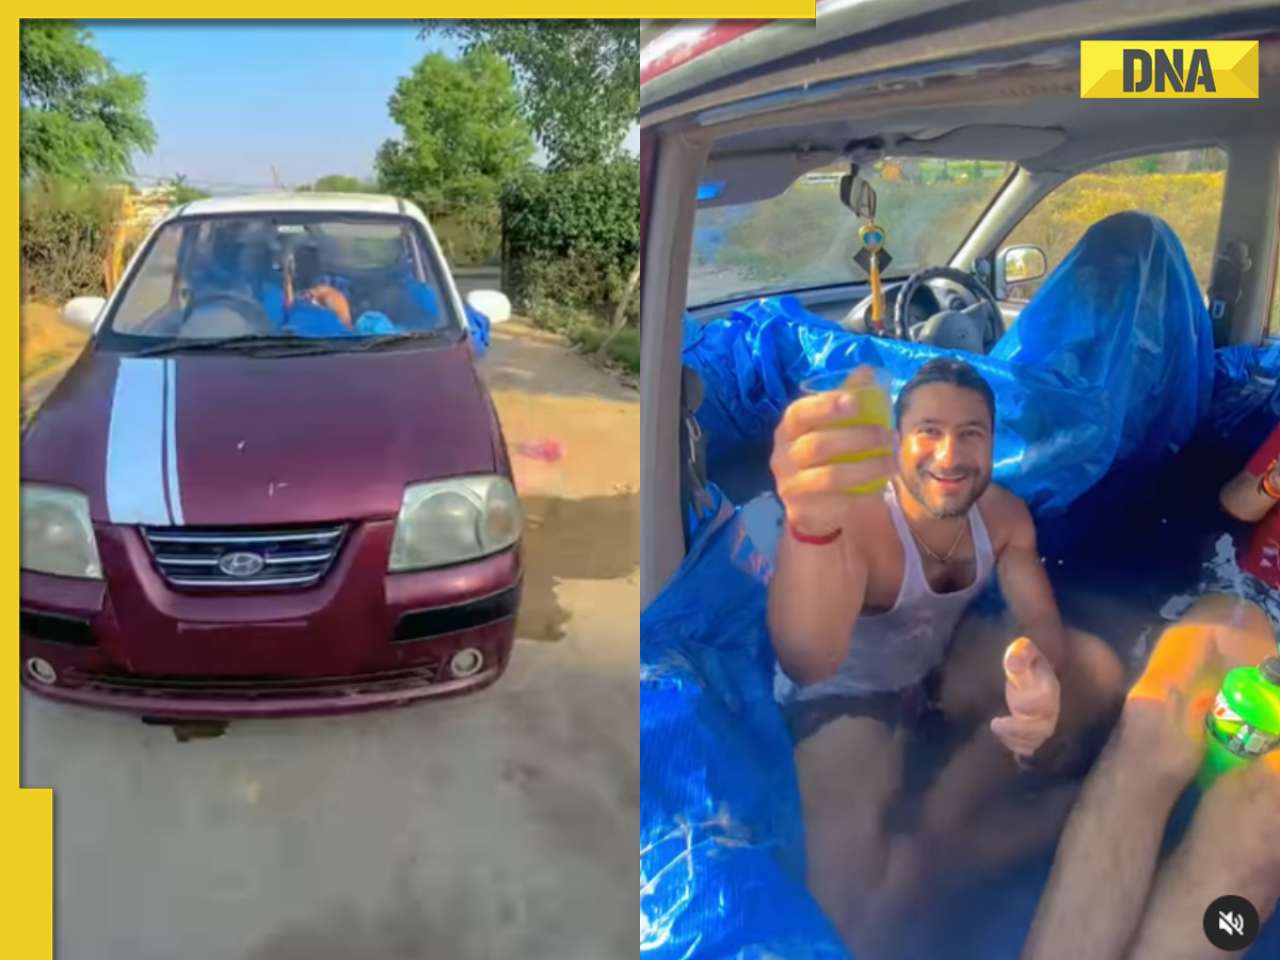 Viral video: Men turn car into mobile swimming pool, internet reacts